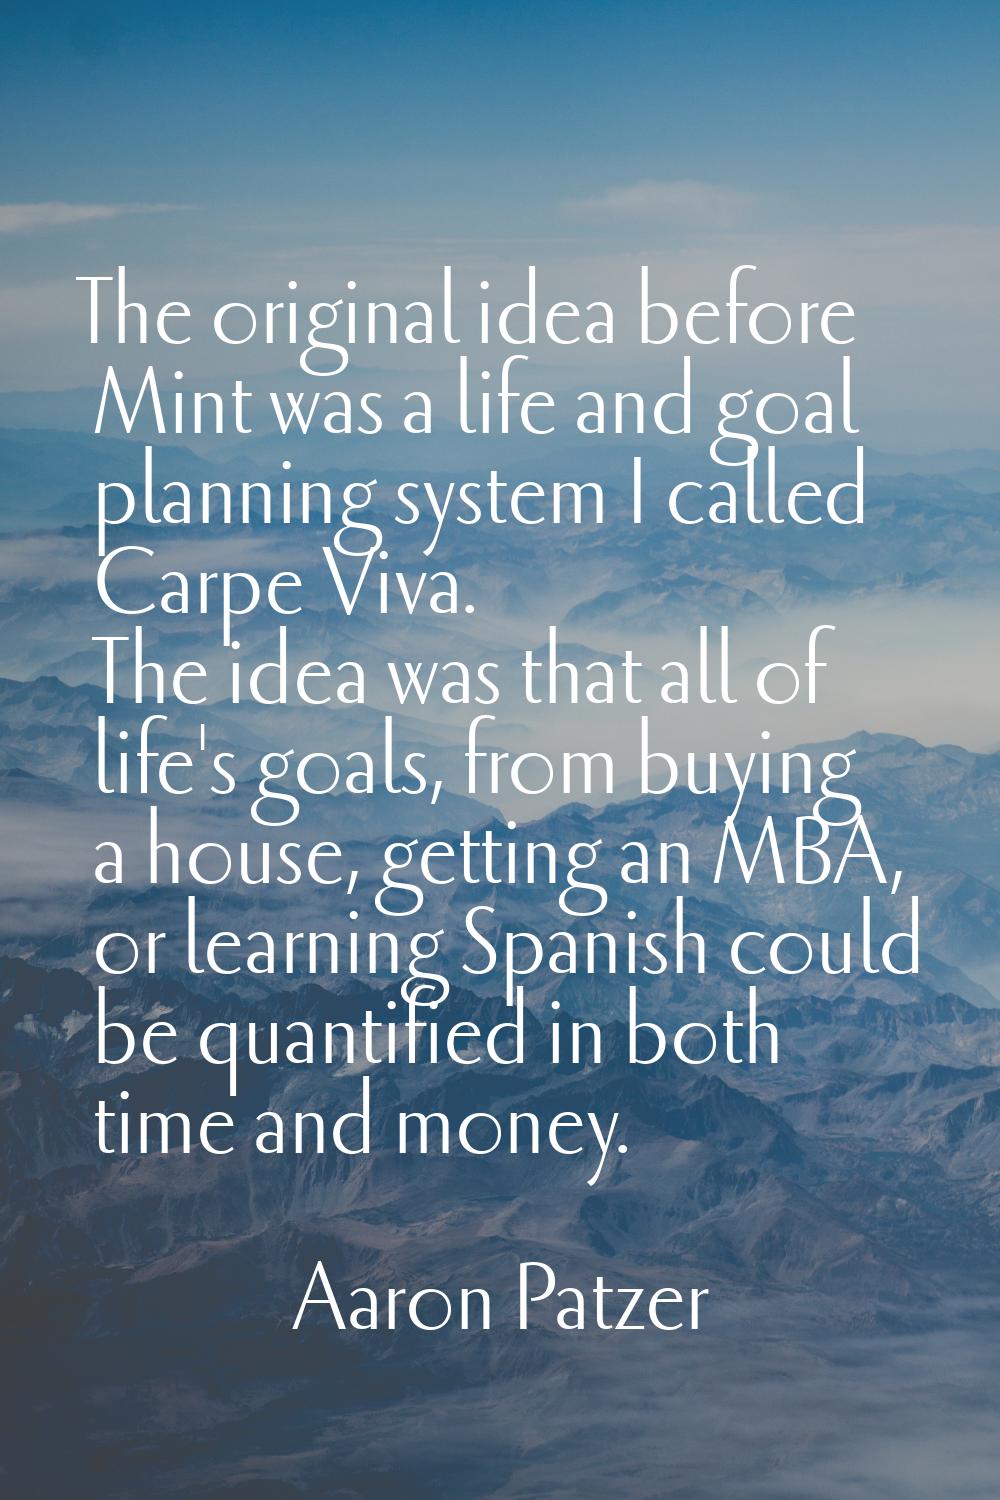 The original idea before Mint was a life and goal planning system I called Carpe Viva. The idea was